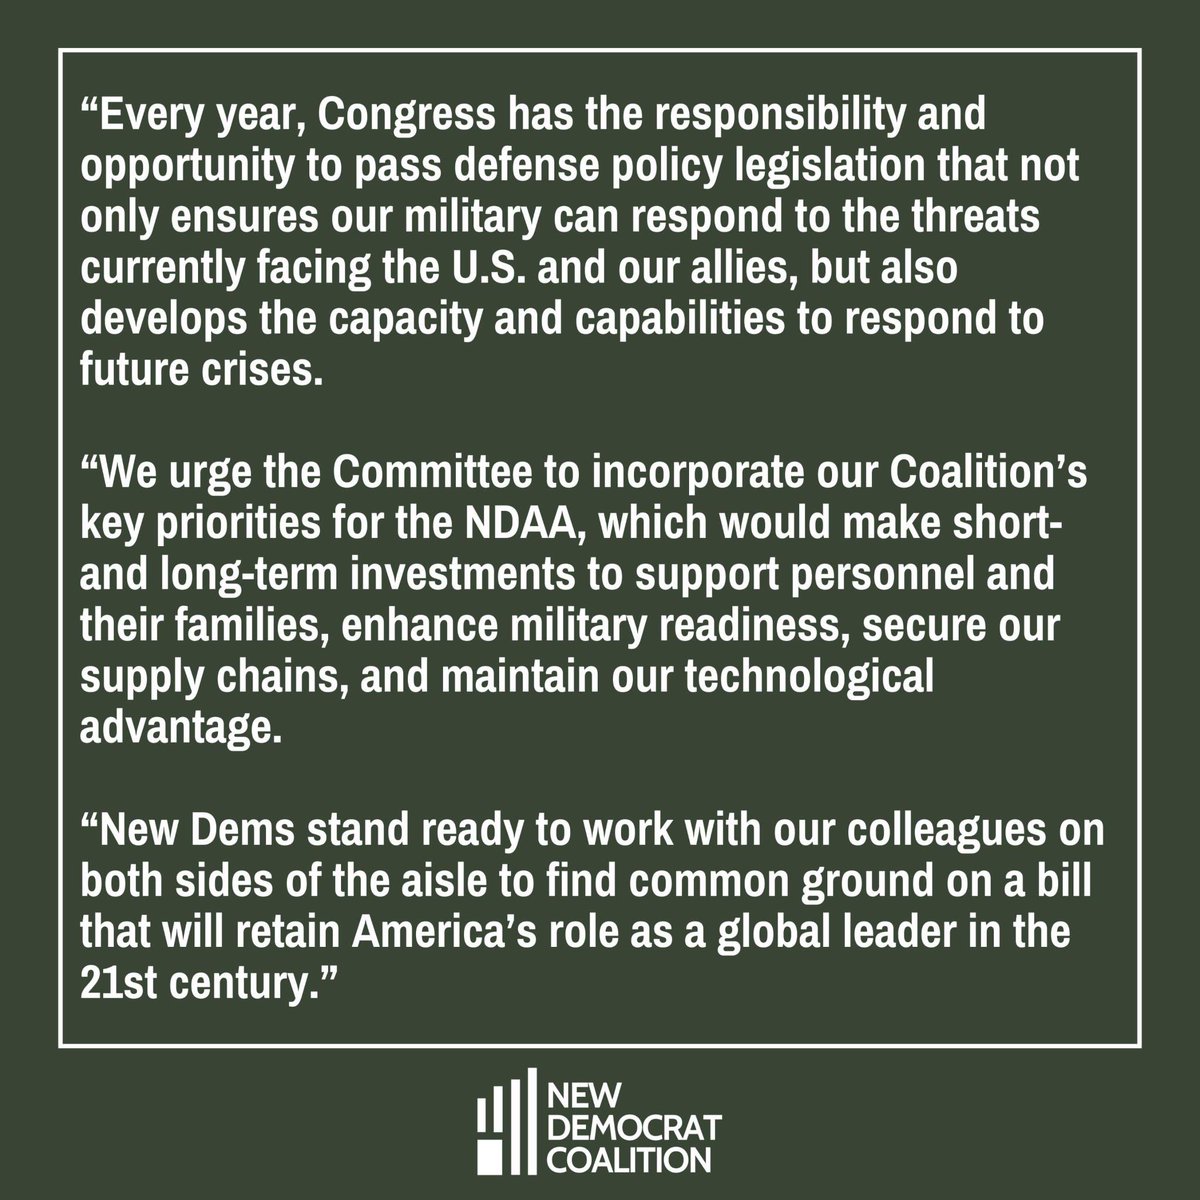 Today, New Dems called for the inclusion of key priorities in the NDAA. Through this bill, we must not only ensure our military can respond to current threats, but also support military personnel and their families, secure supply chains, and maintain our technological advantage.